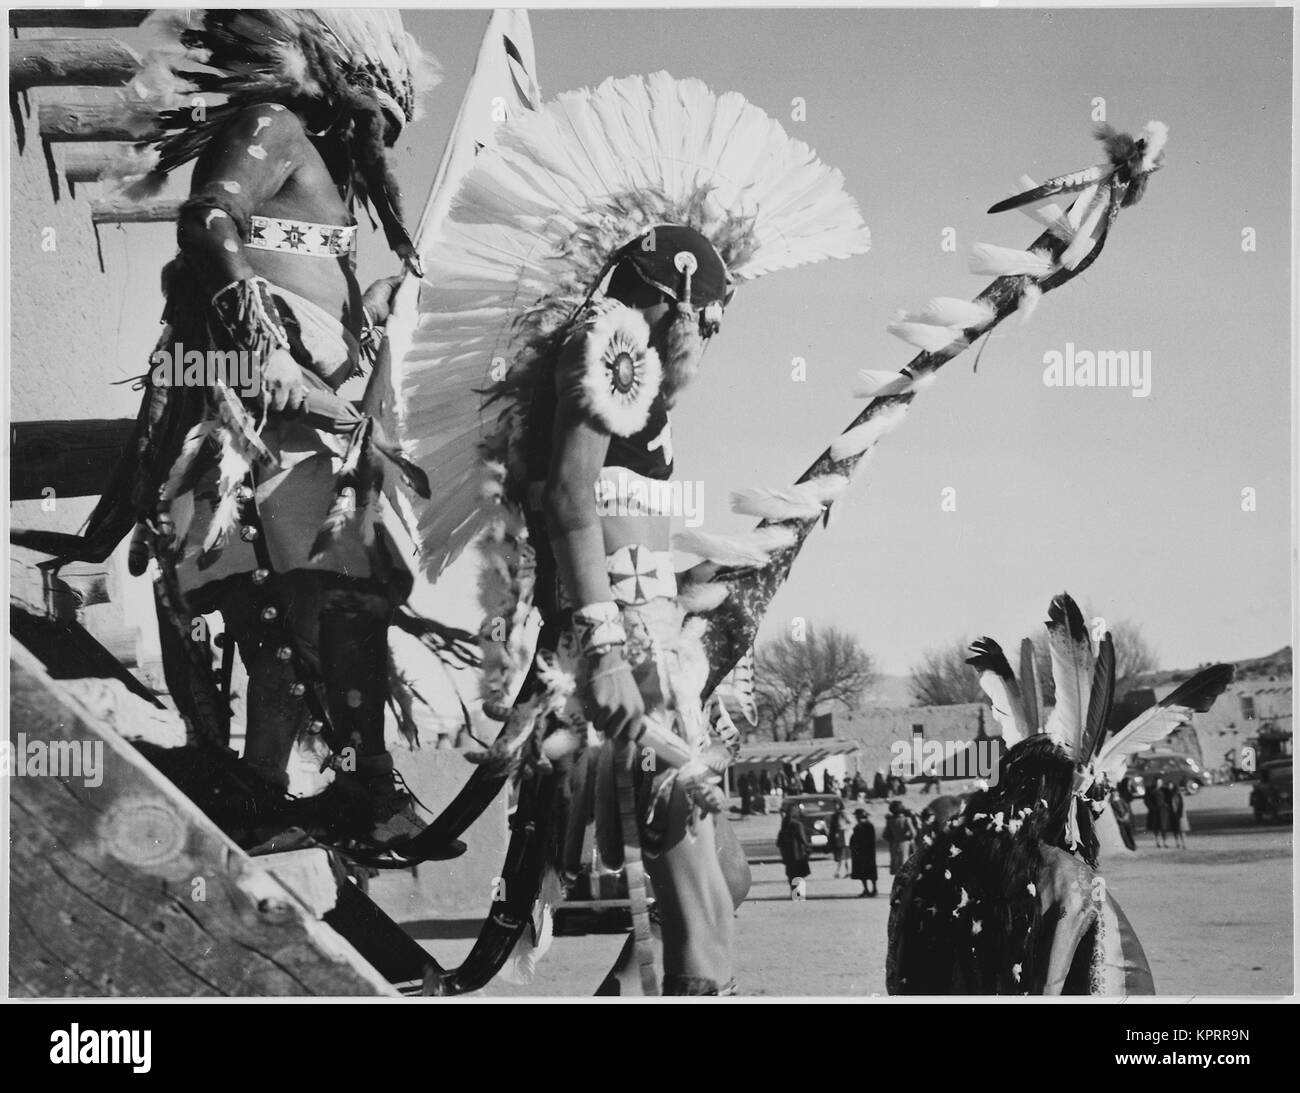 Three Indians in headdress in foreground watching tourists 'Dance San Ildefonso Pueblo New Mexico 1942.' 1942 Stock Photo